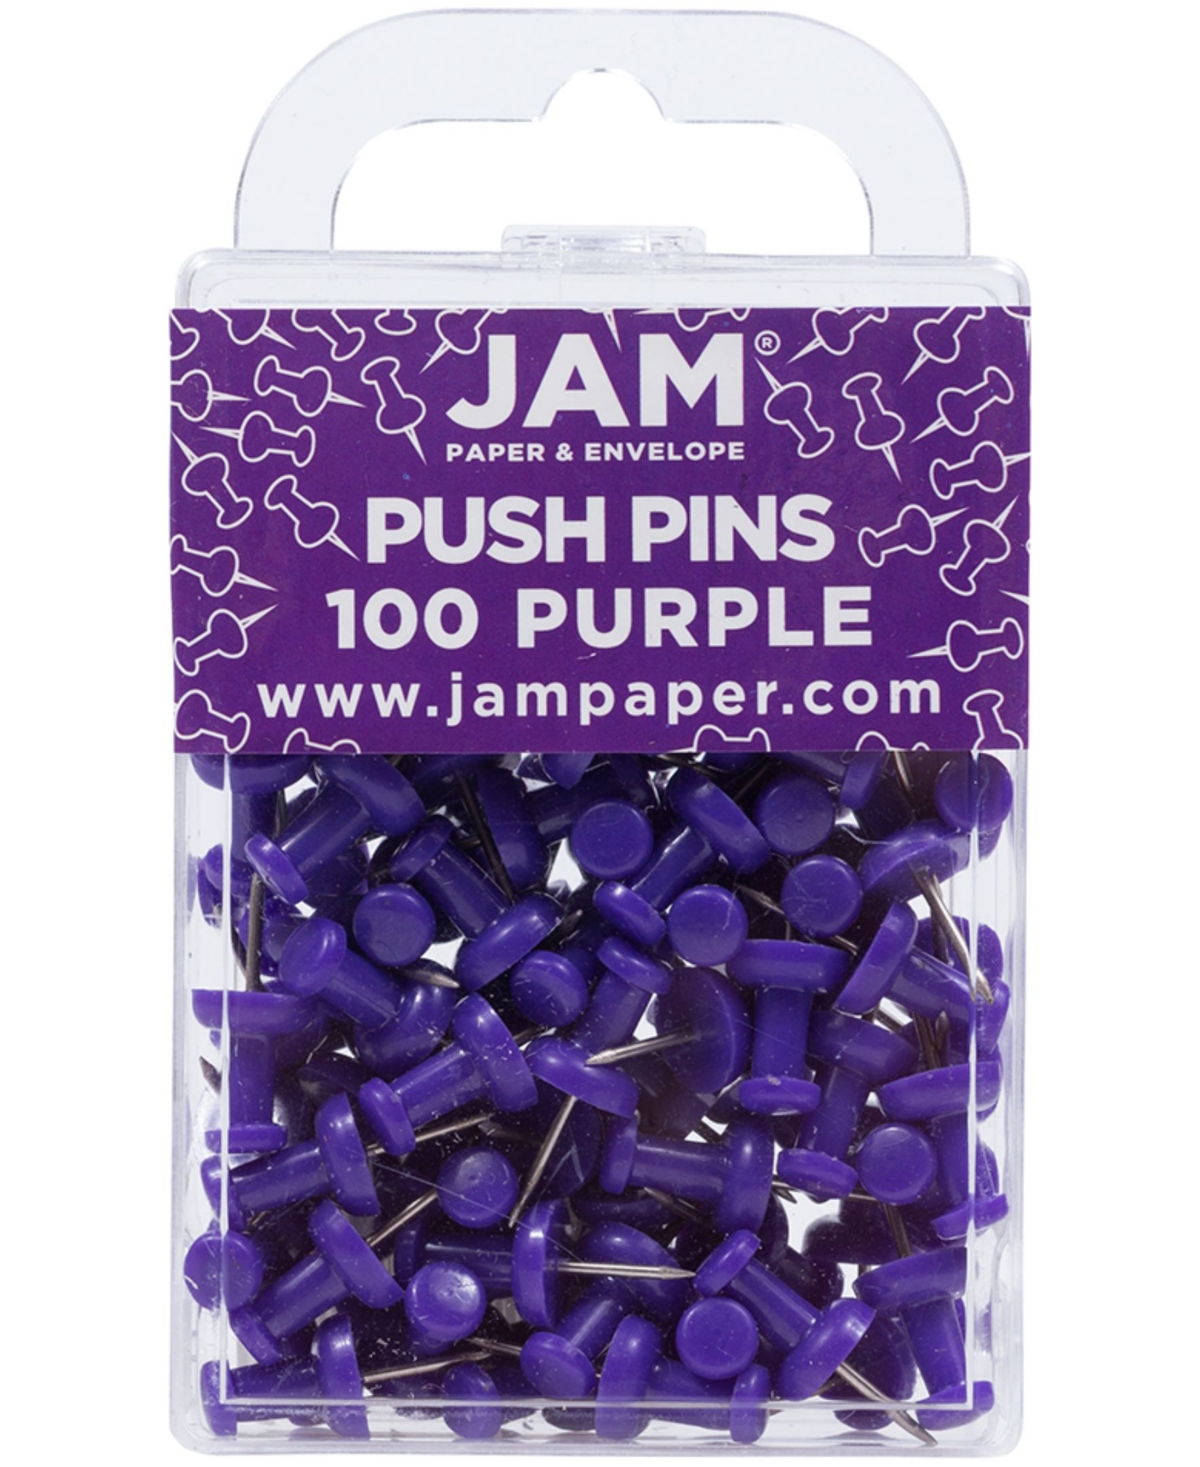 Jam Paper Colorful Push Pins In Purple